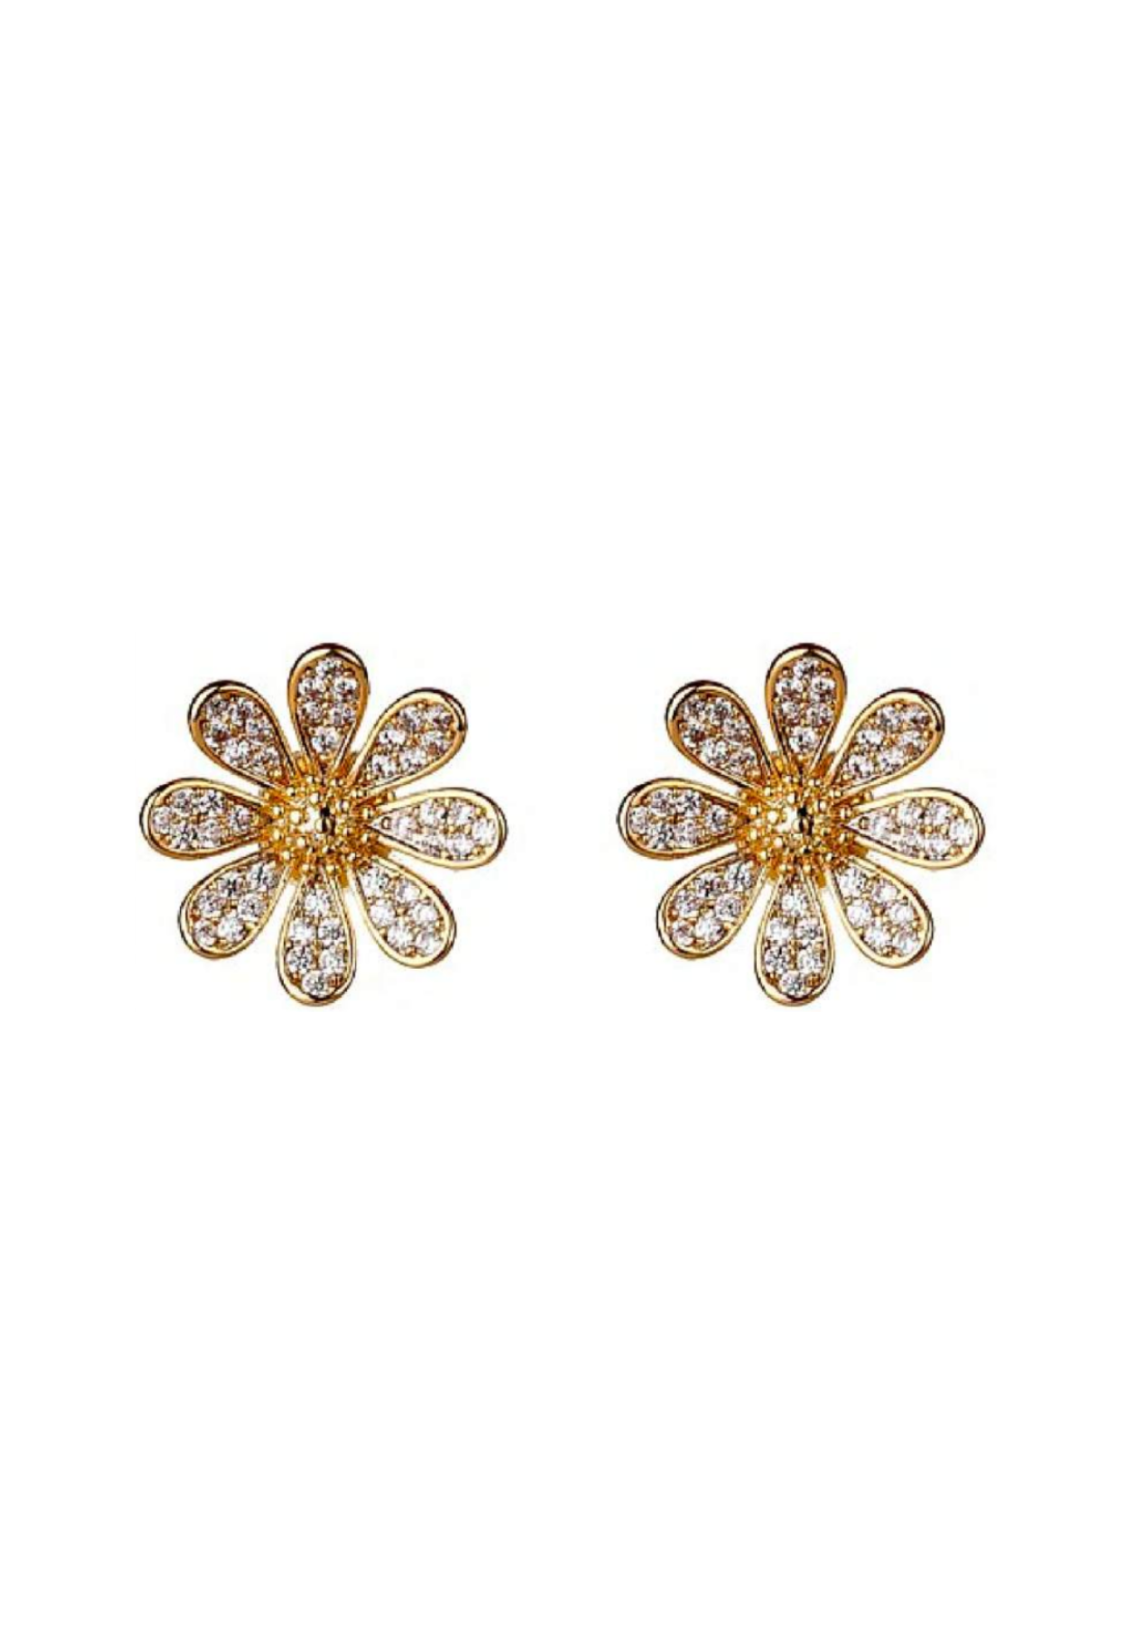 GREGORY LADNER CZ DAISY EARRING - GOLD